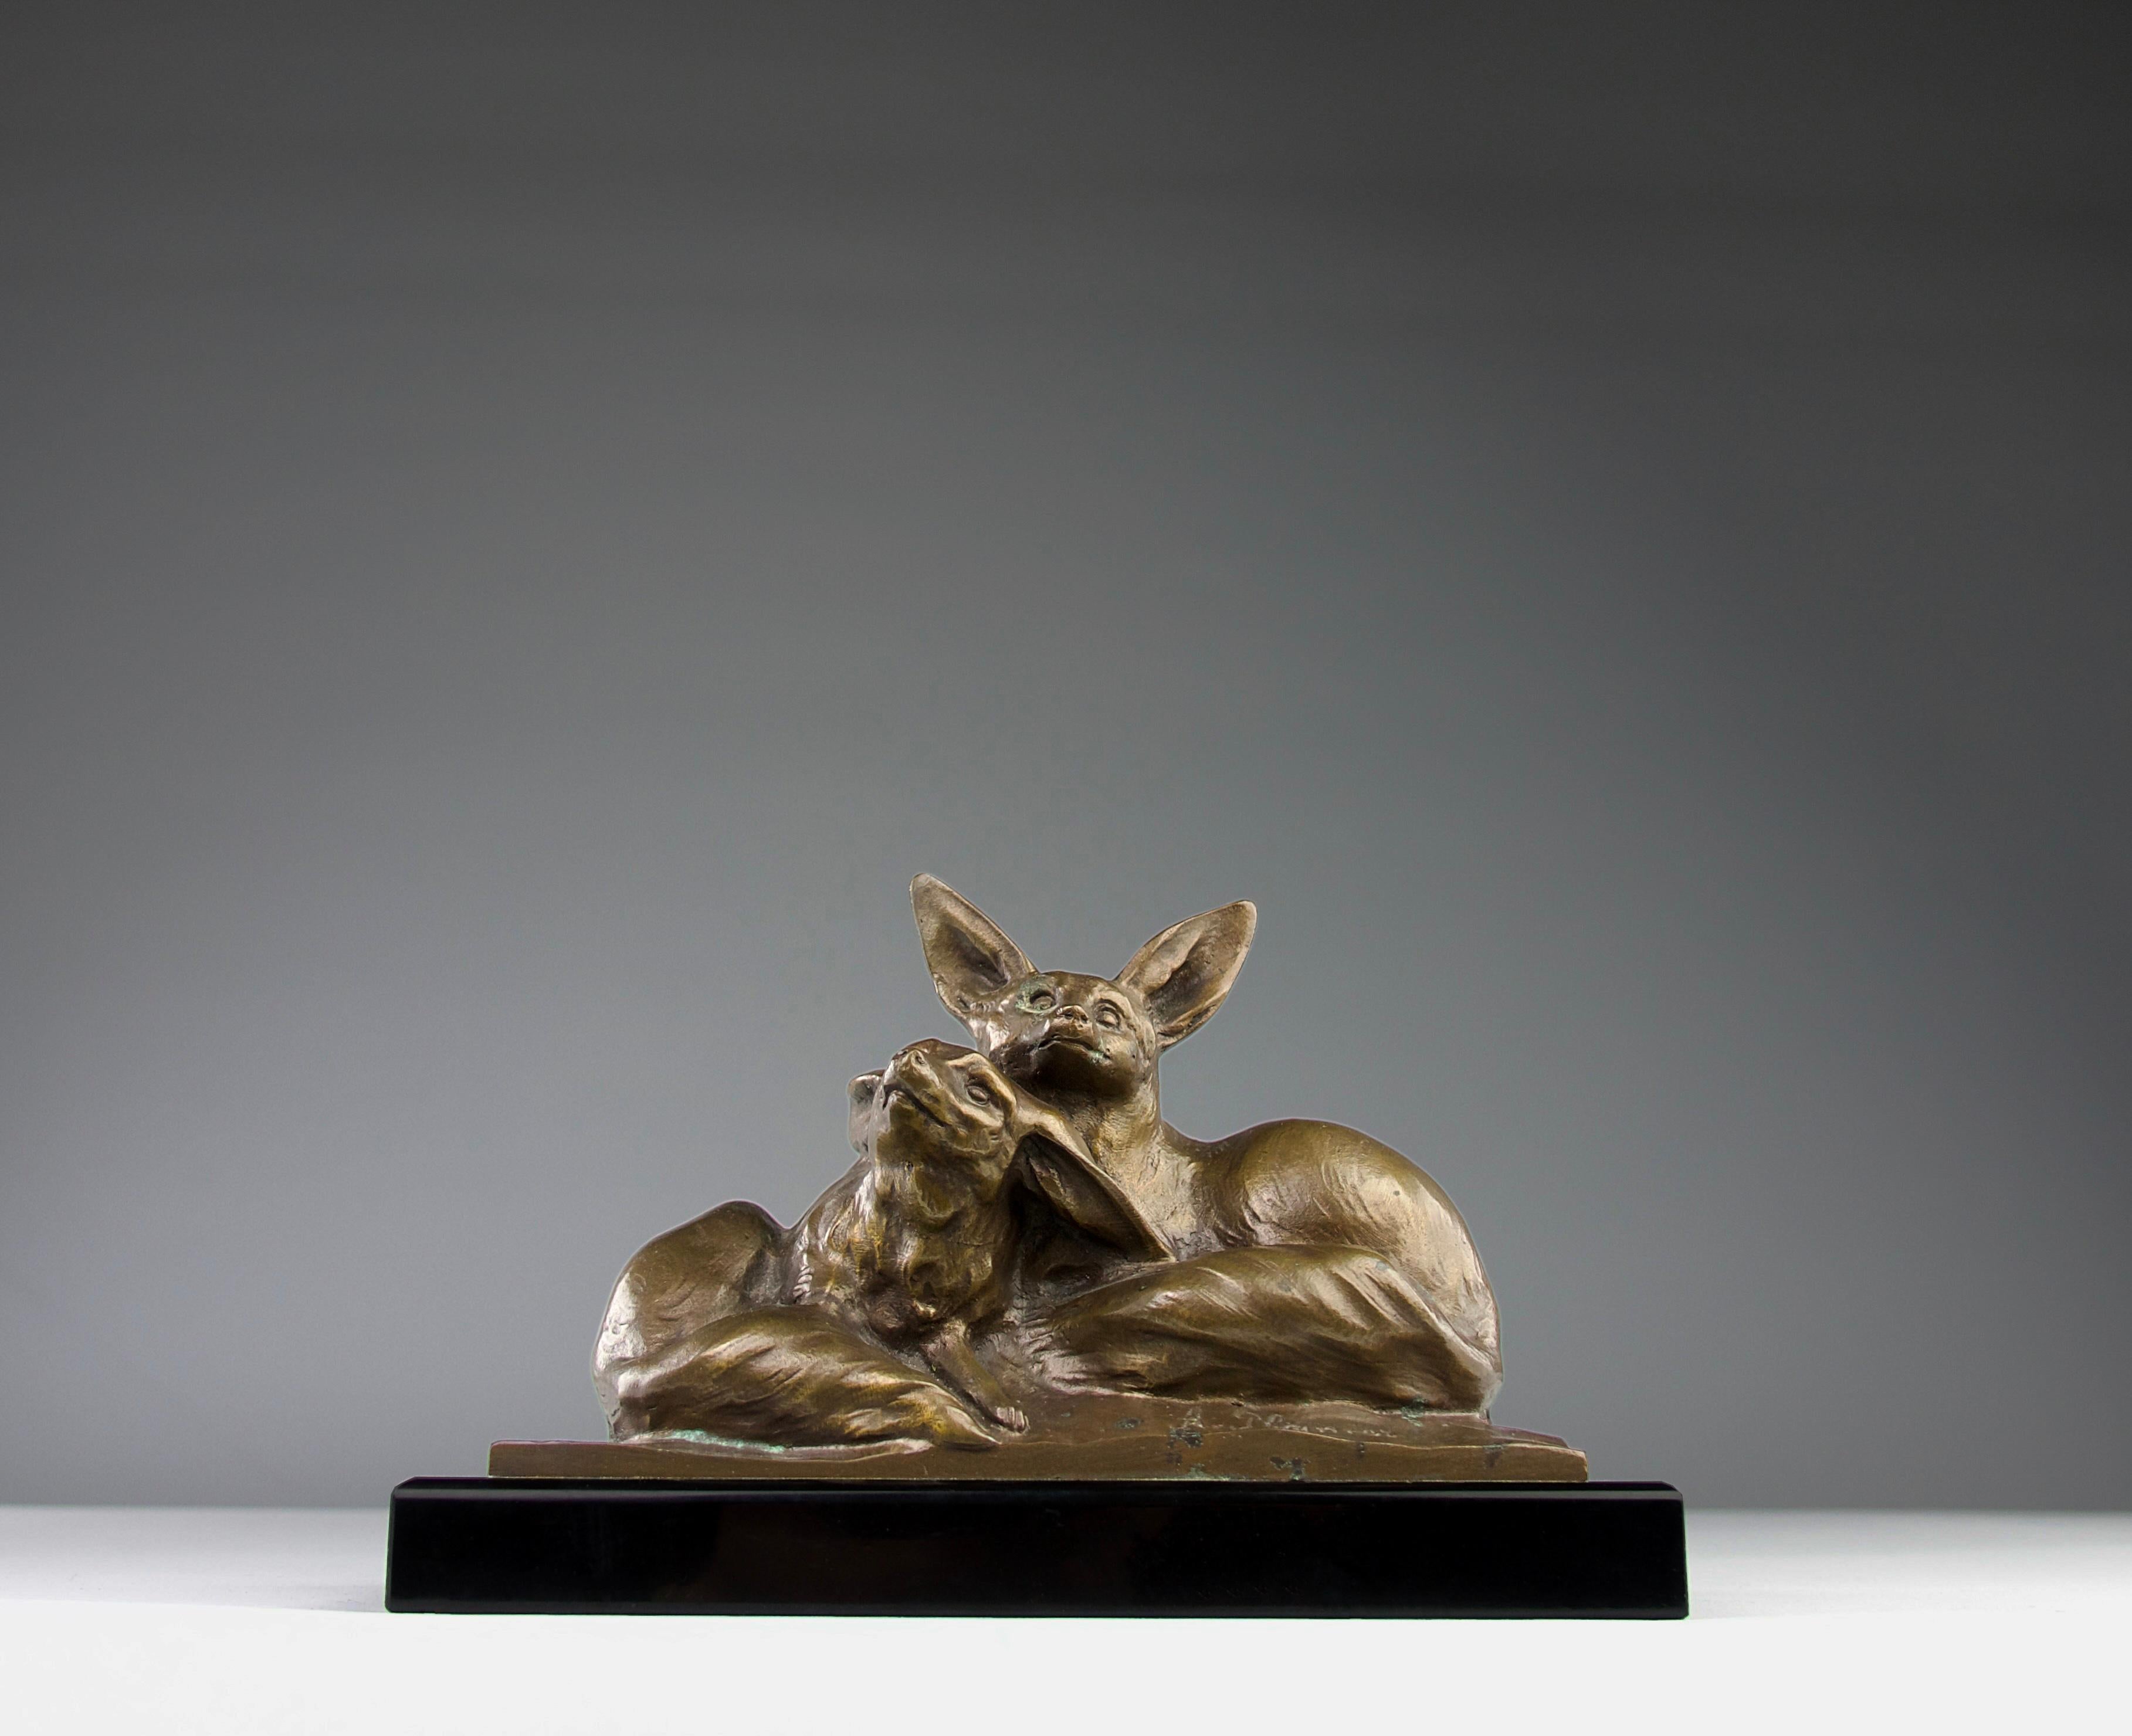 Superb patinated bronze sculpture by A. Plisnier of two fennecs huddling together manufactured by the Gorini Frères Foundry of Poitiers. France, 1920s.

Signed by artist and foundry.

In good condition. Slight oxidation of time.

Dimension in cm ( H